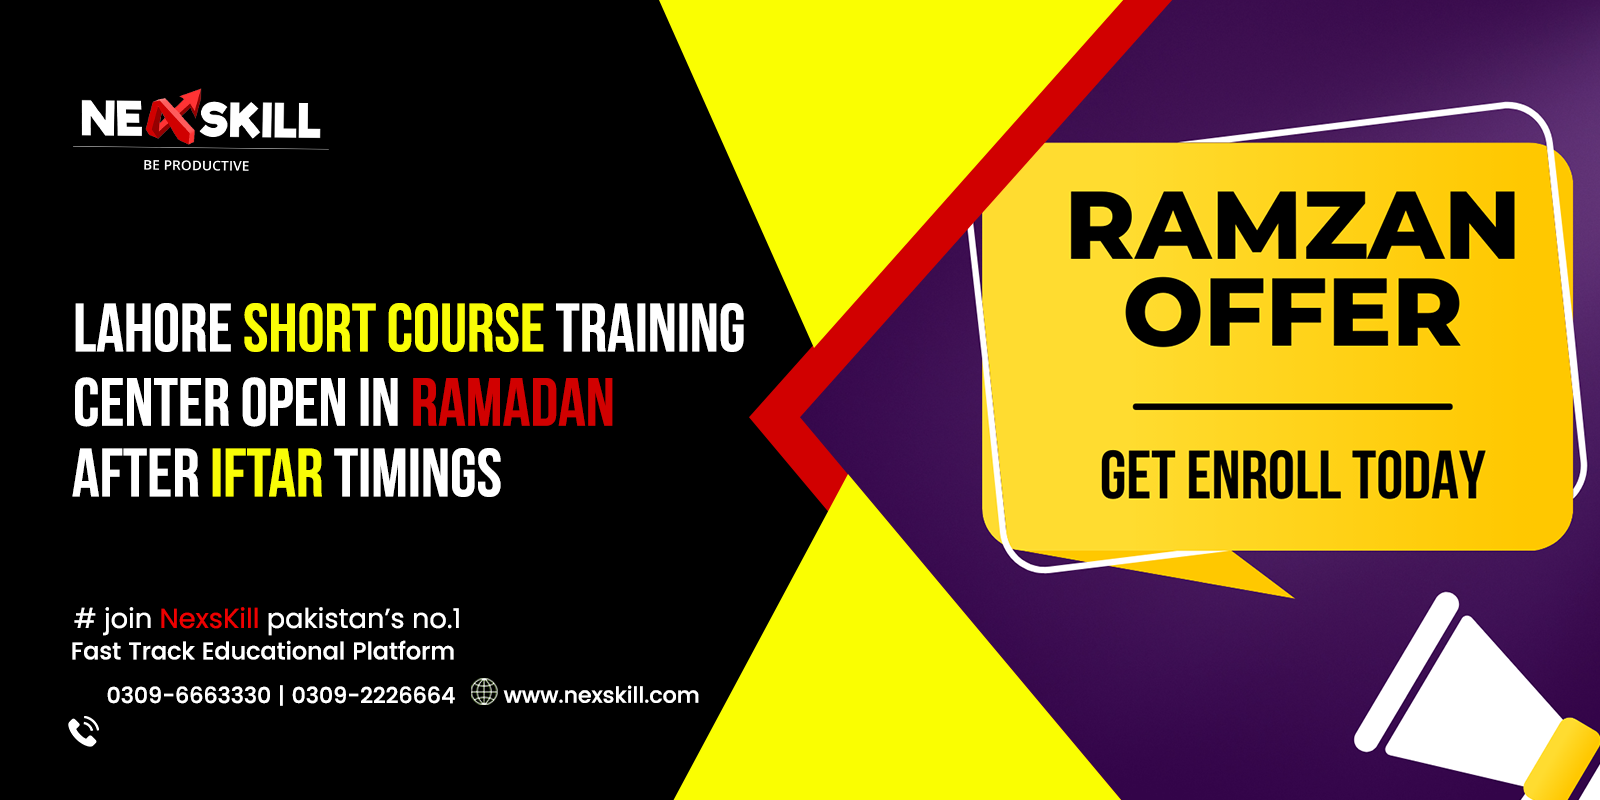 Lahore Short Course Training Center Open in Ramadan After Iftar Timings